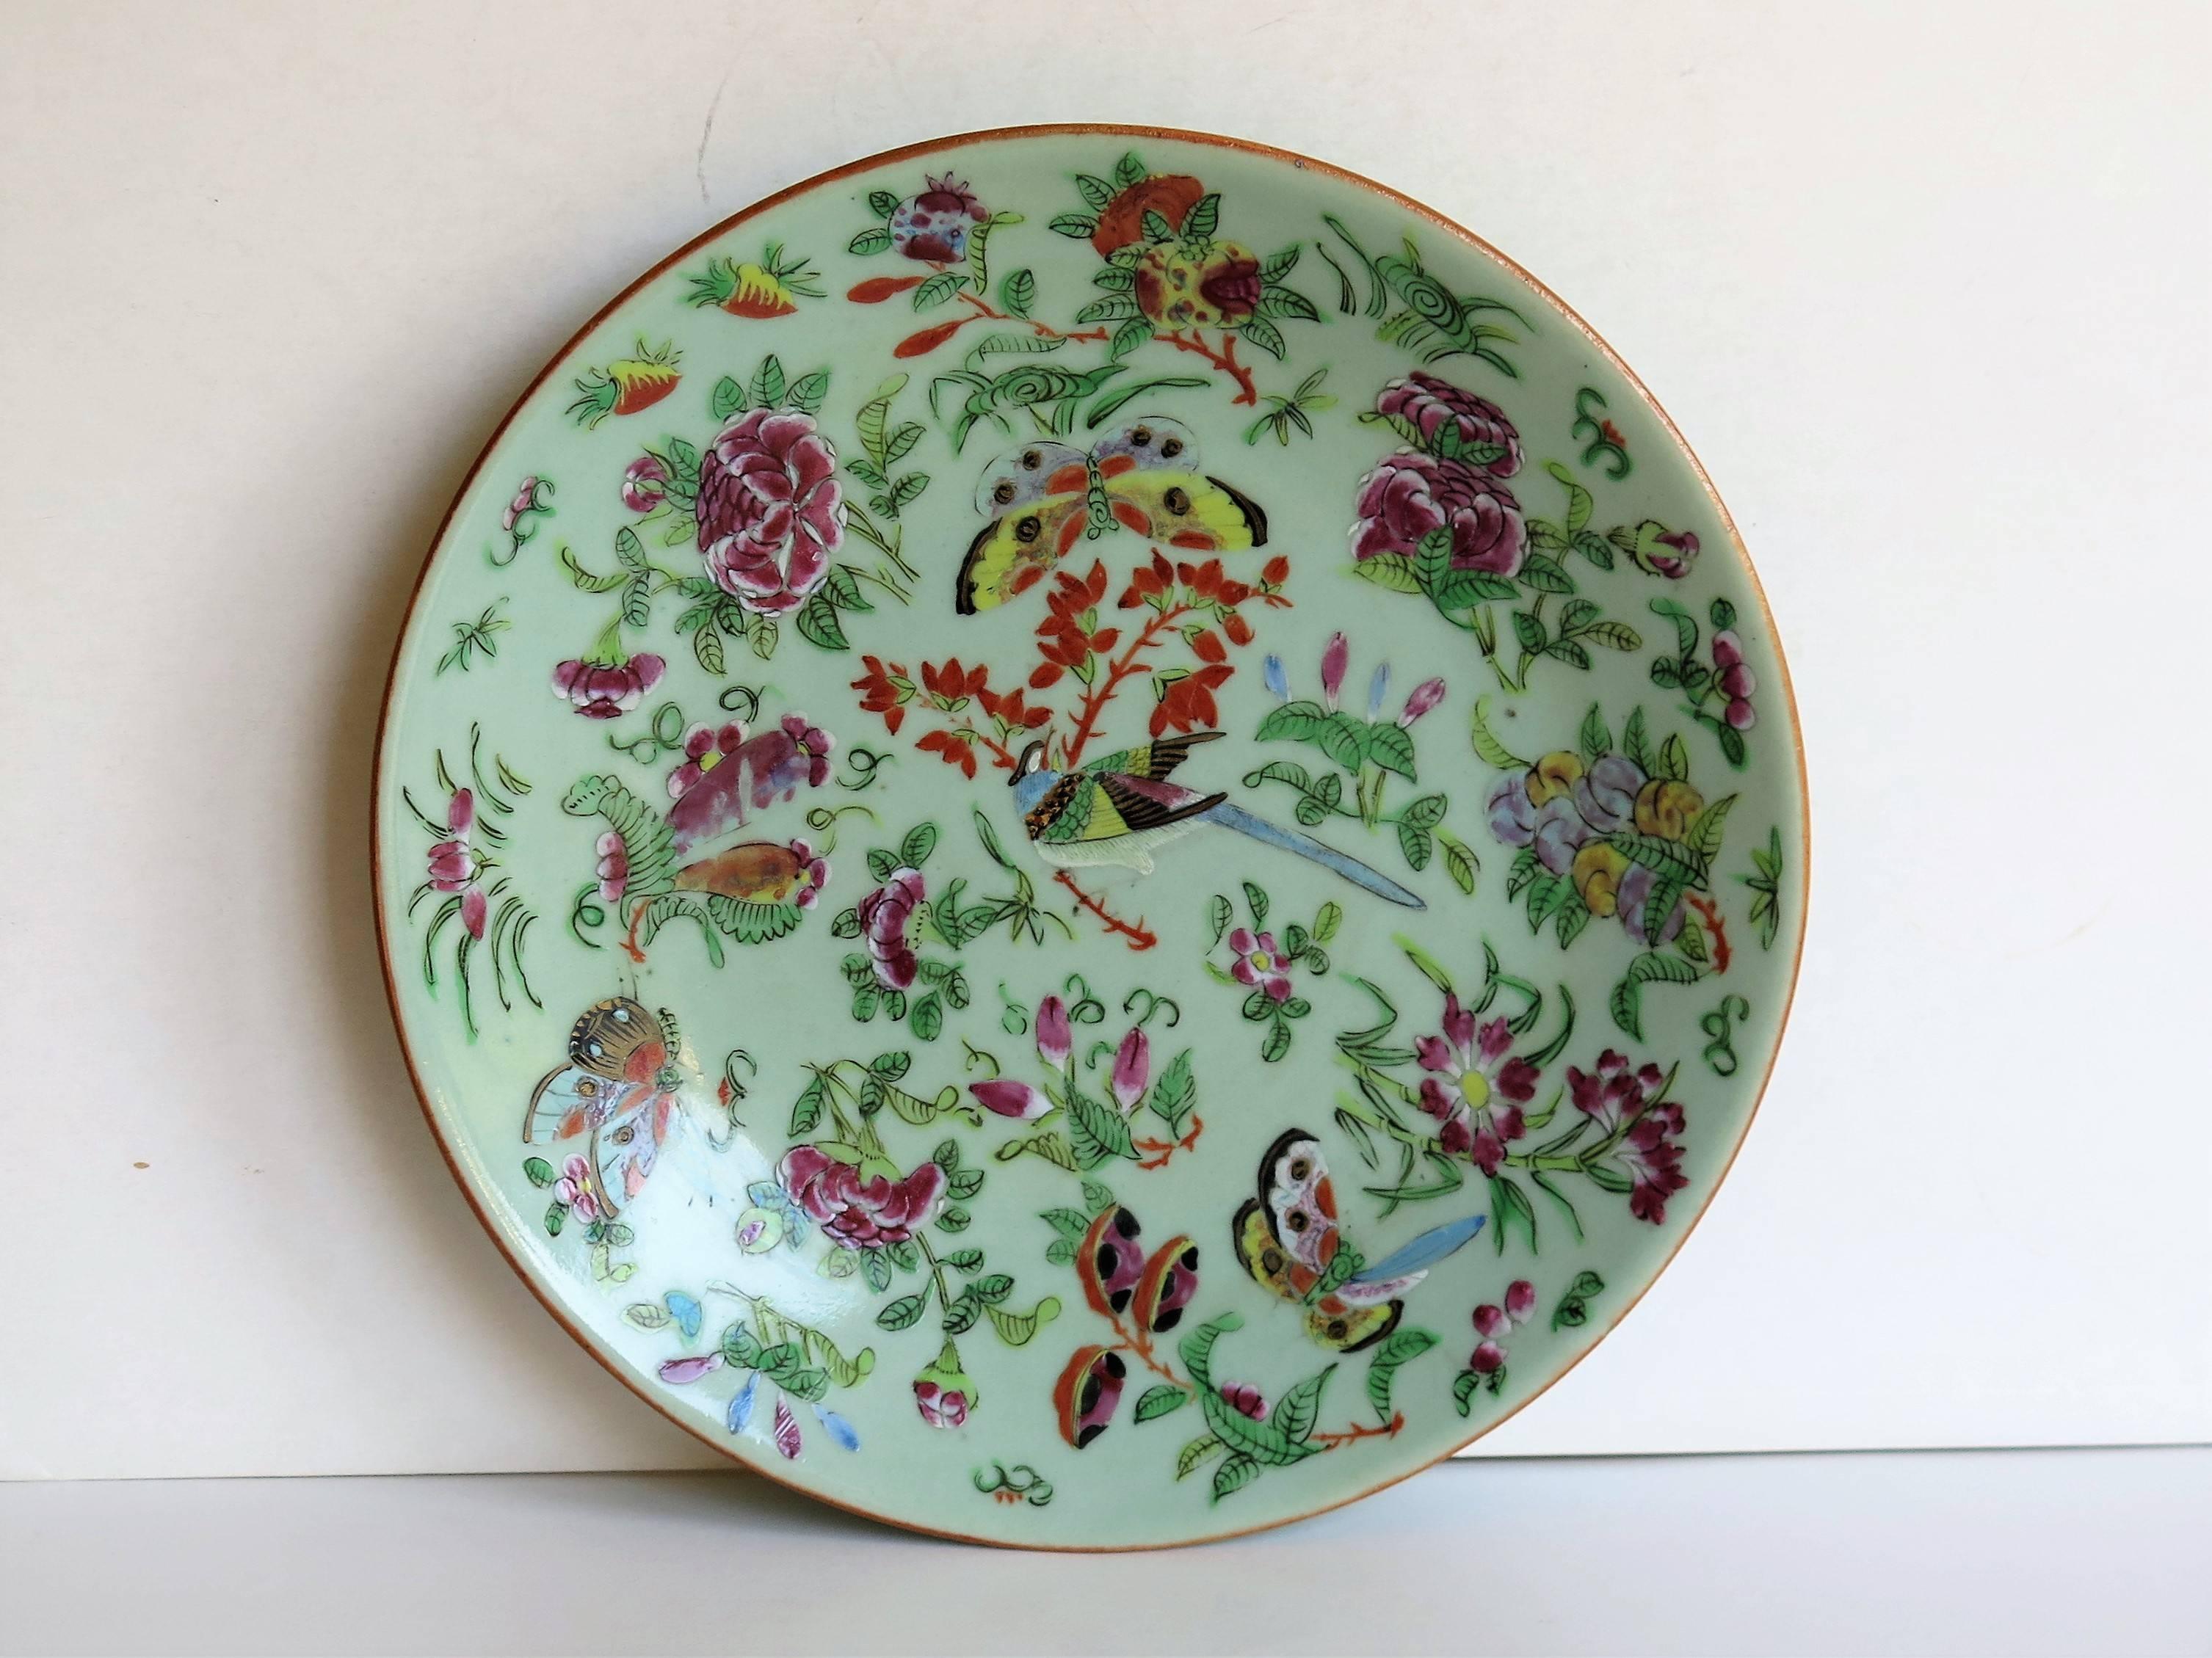 This is a very good 19th century Chinese Export, (Canton) Plate or Dish, which we date to the early 19th century, circa 1820 of the Qing dynasty.

The plate has a light green, Celadon ground with beautifully hand painted decoration, in over-glaze